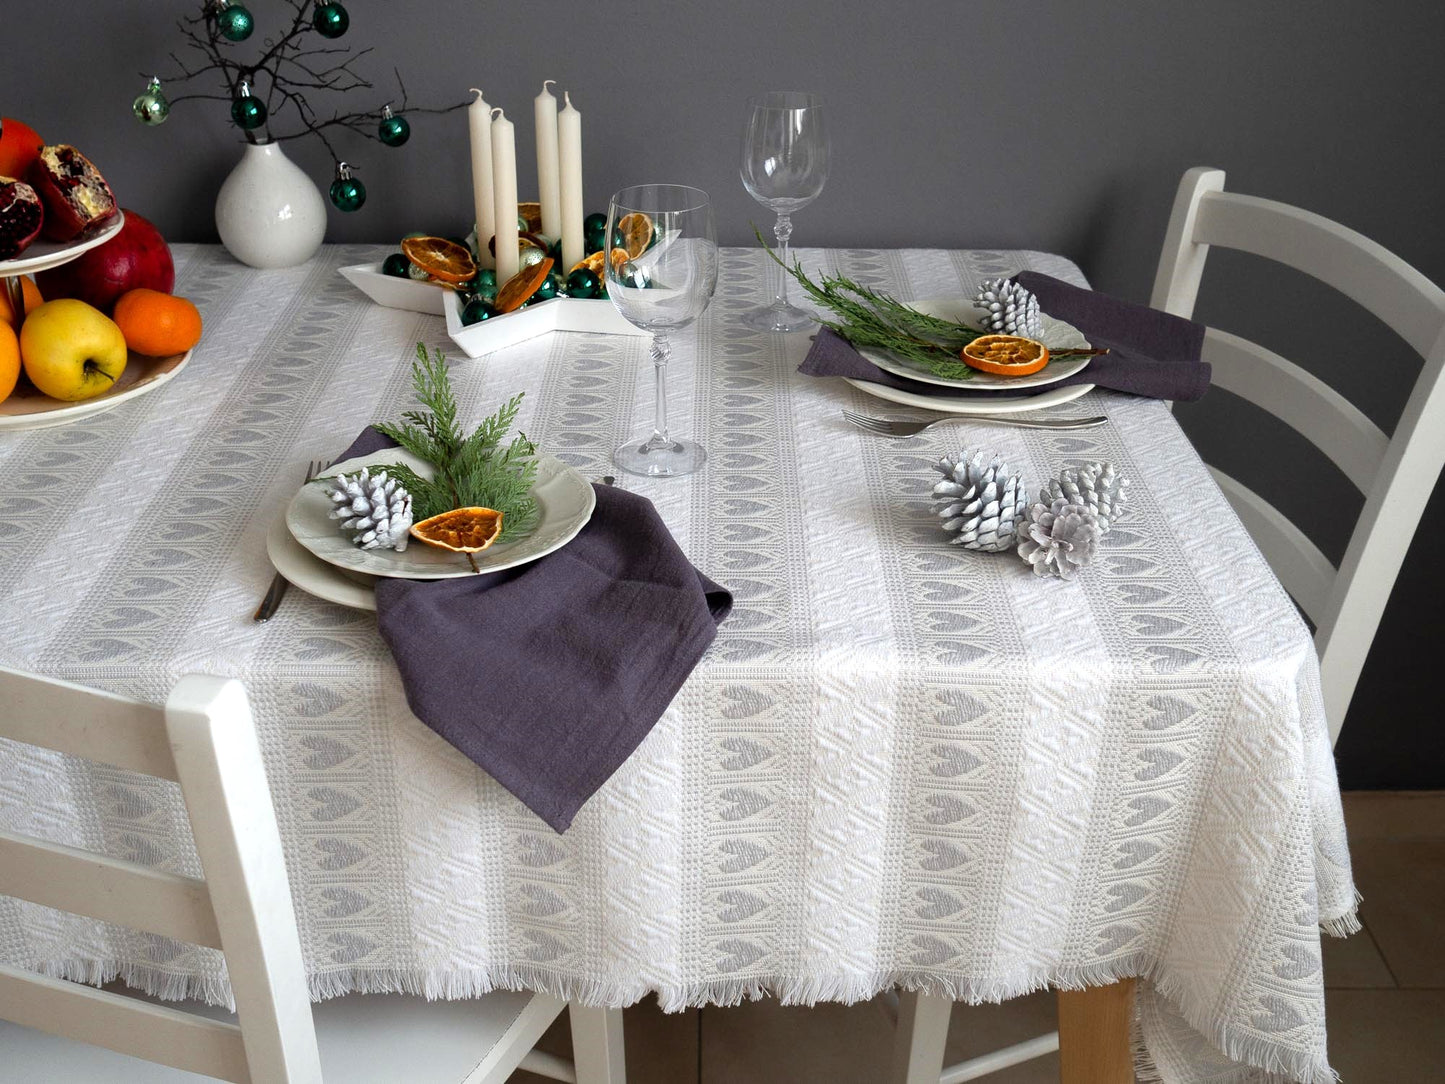 Soft Grey and White Tablecloth